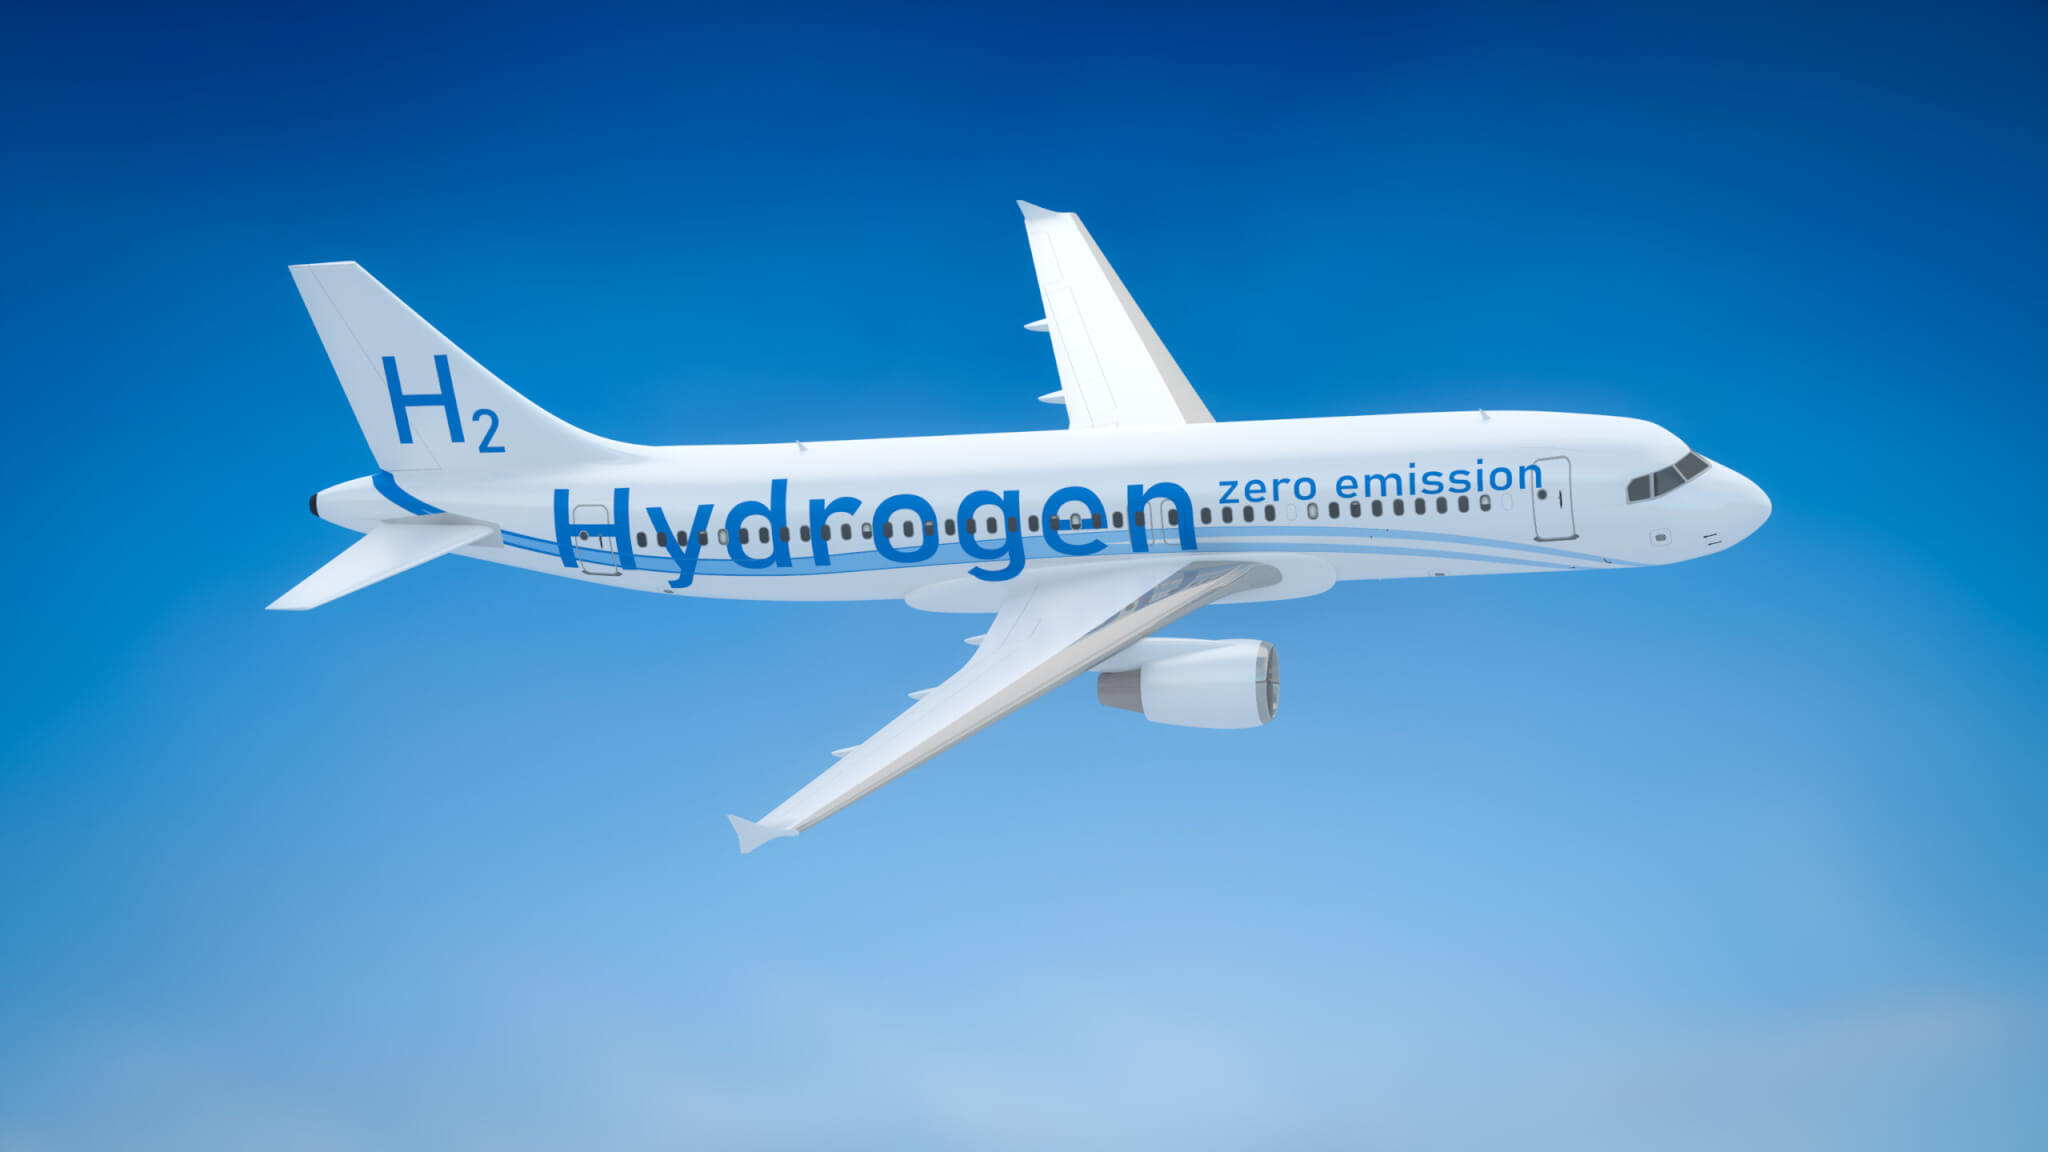 hydrogen-powered-aircraft-could-make-up-38-of-all-aircraft-by-2050-reports-mckinsey